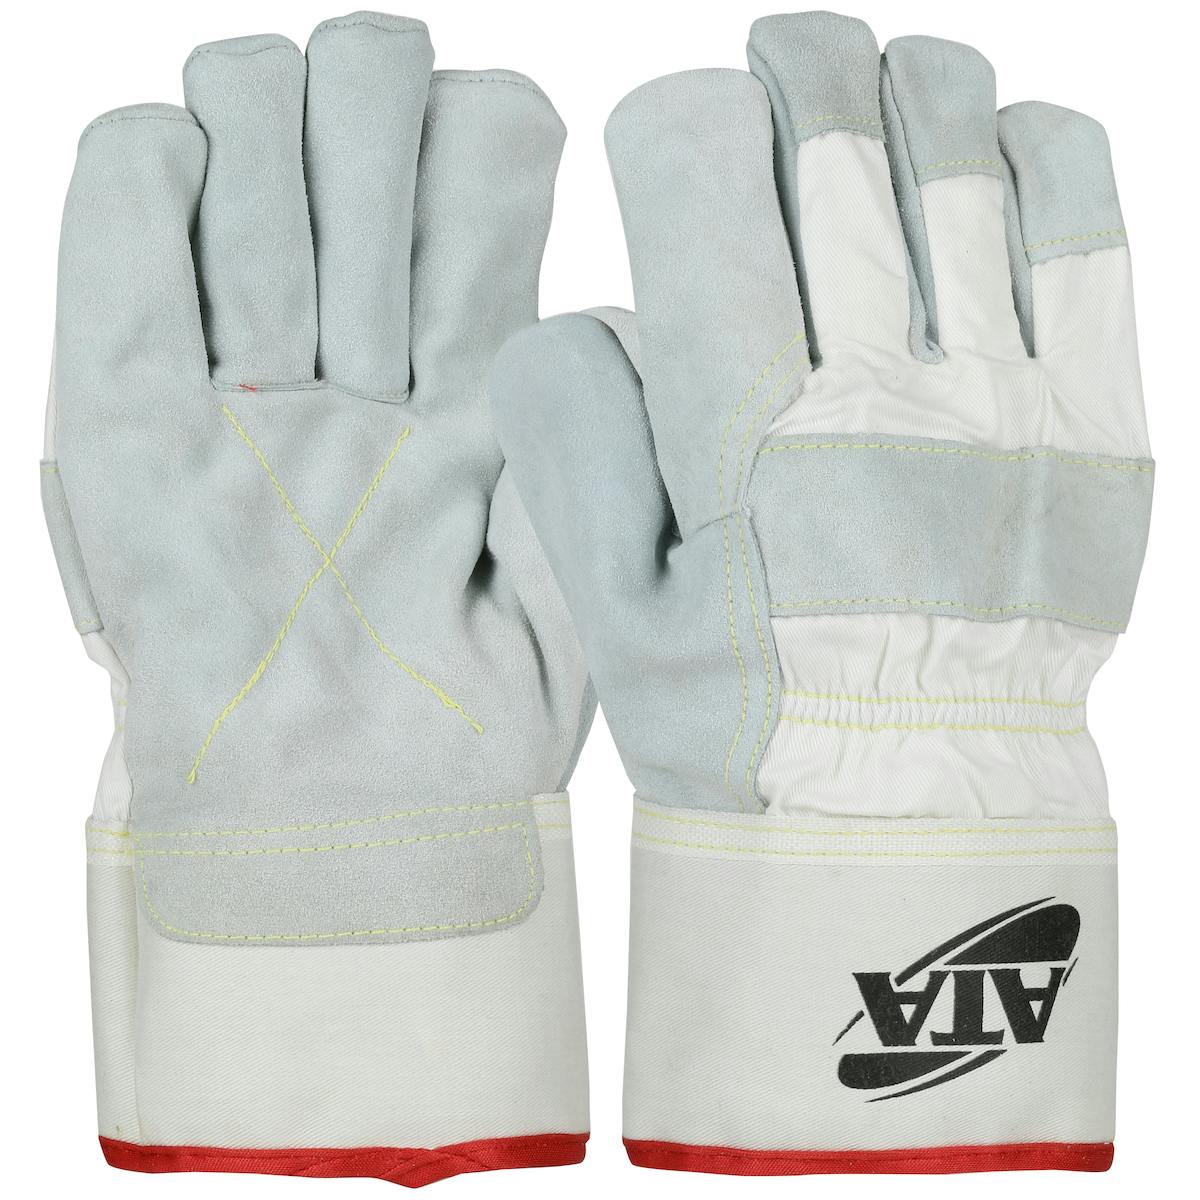 PIP® Split Cowhide Leather Palm Glove with Canvas Back and ATA® Technology Lining - Safety Cuff (MJVATA)_0